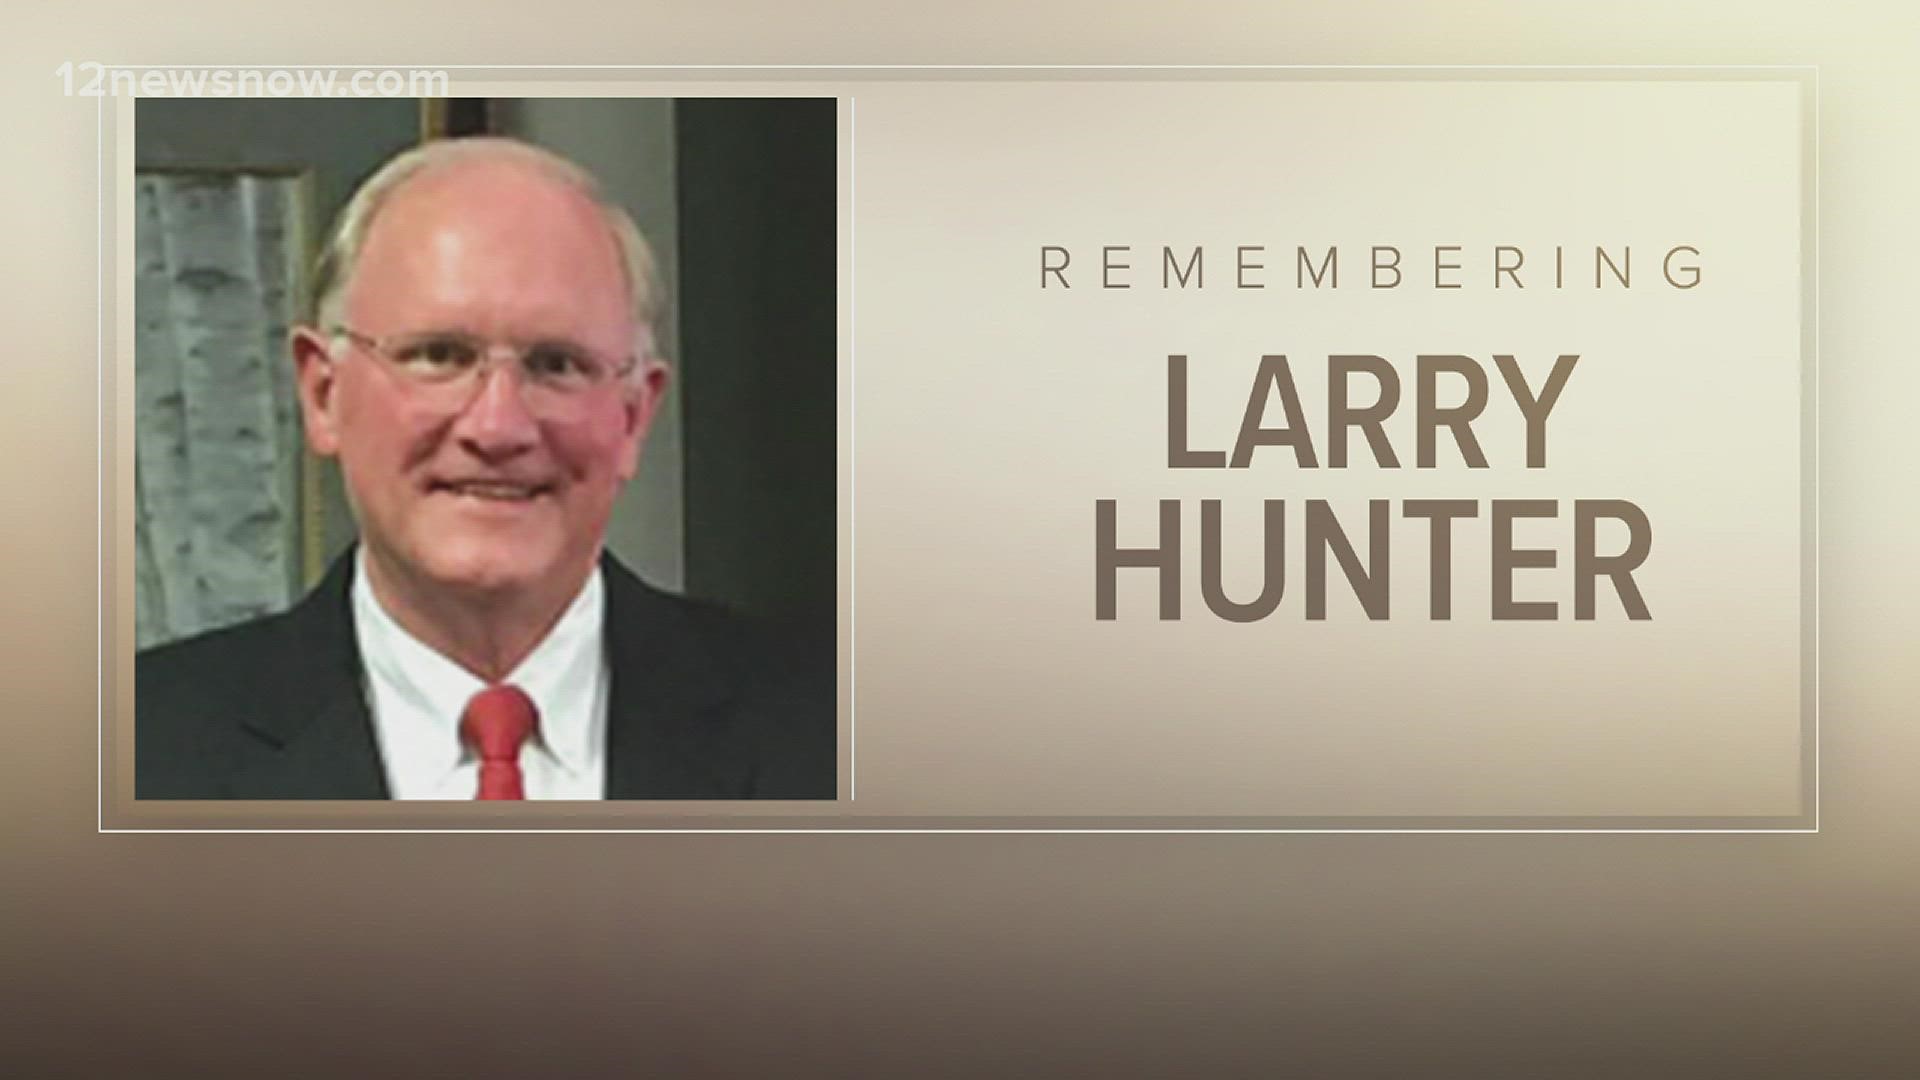 He was a Beaumont attorney and a lifelong Vidor resident.